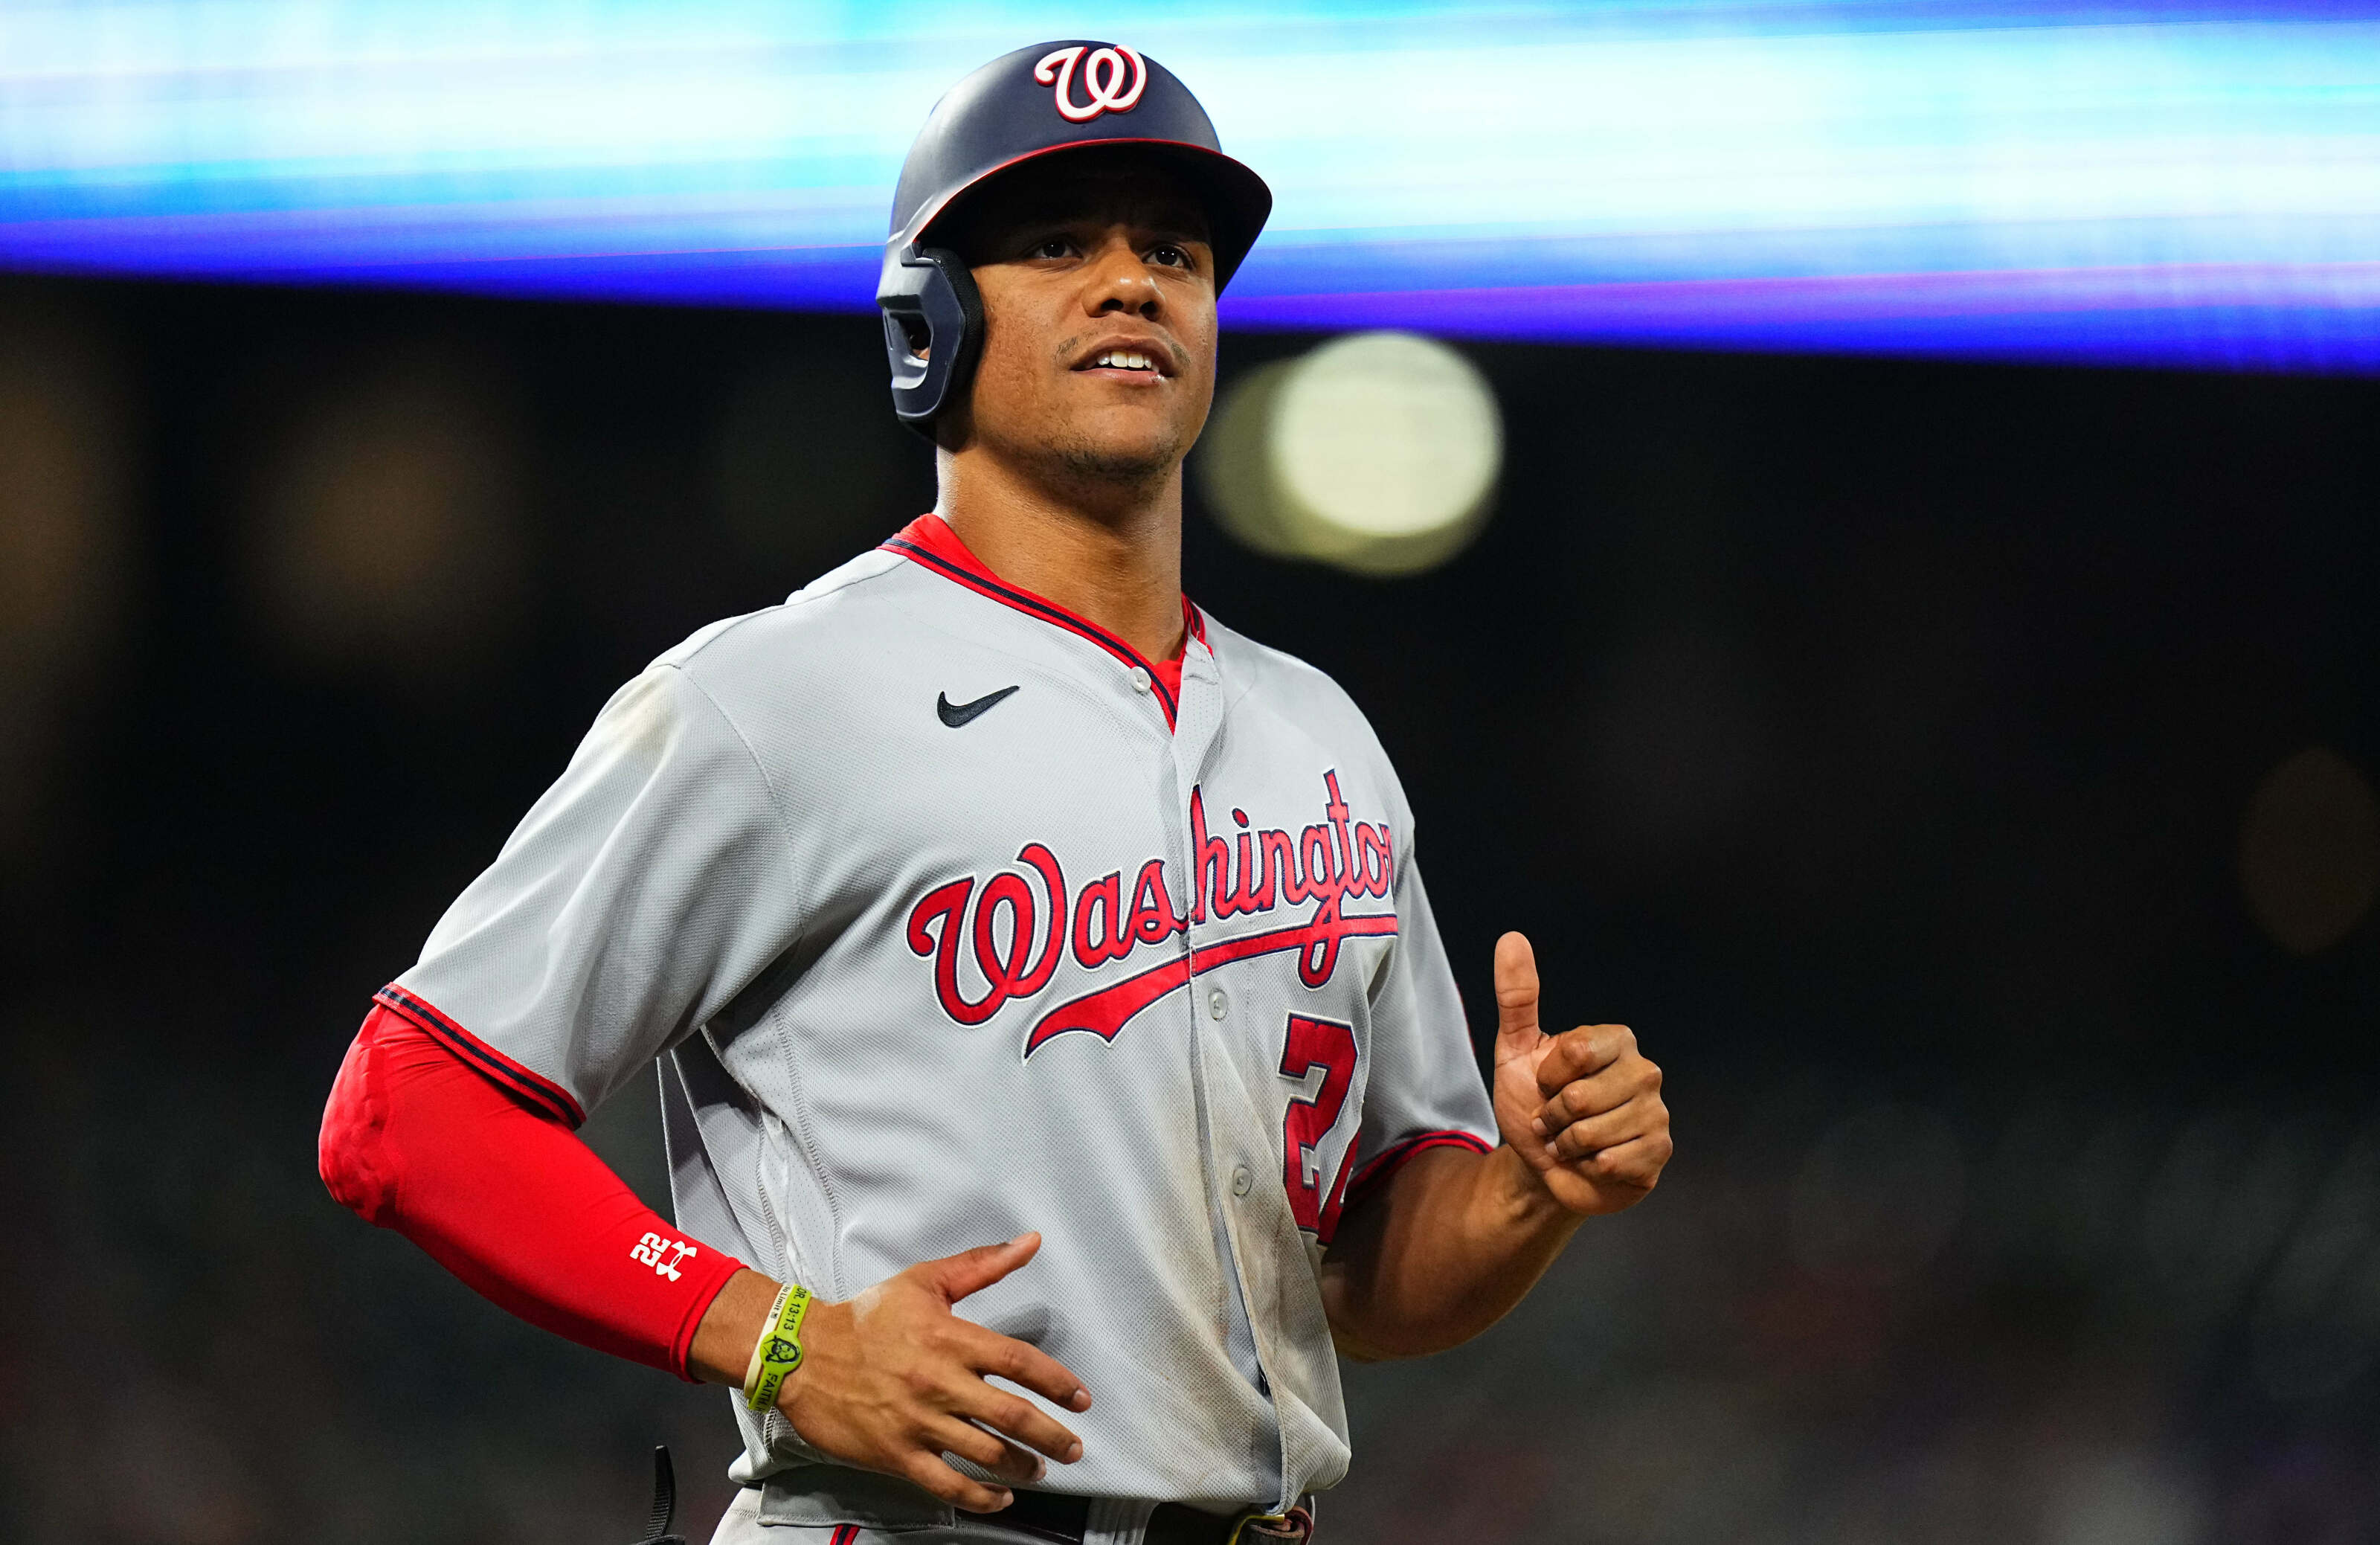 What's the 2022 Washington Nationals dream lineup? - Page 2